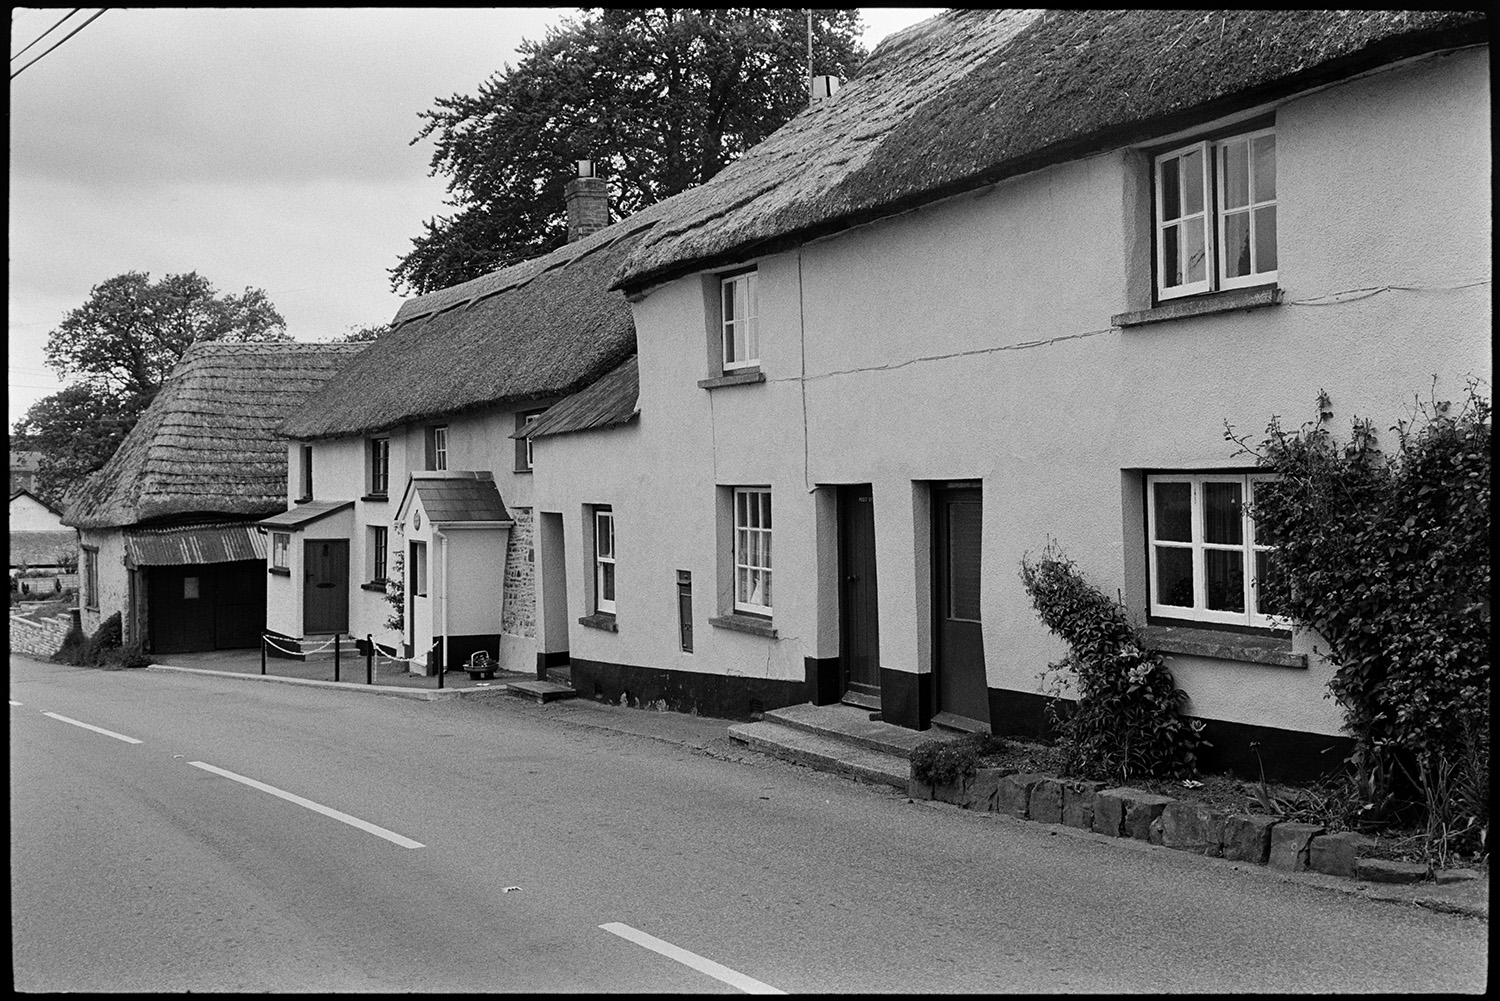 Village and farm comparison with old photo.
[Thatched cottages along a roadside in Meshaw.]